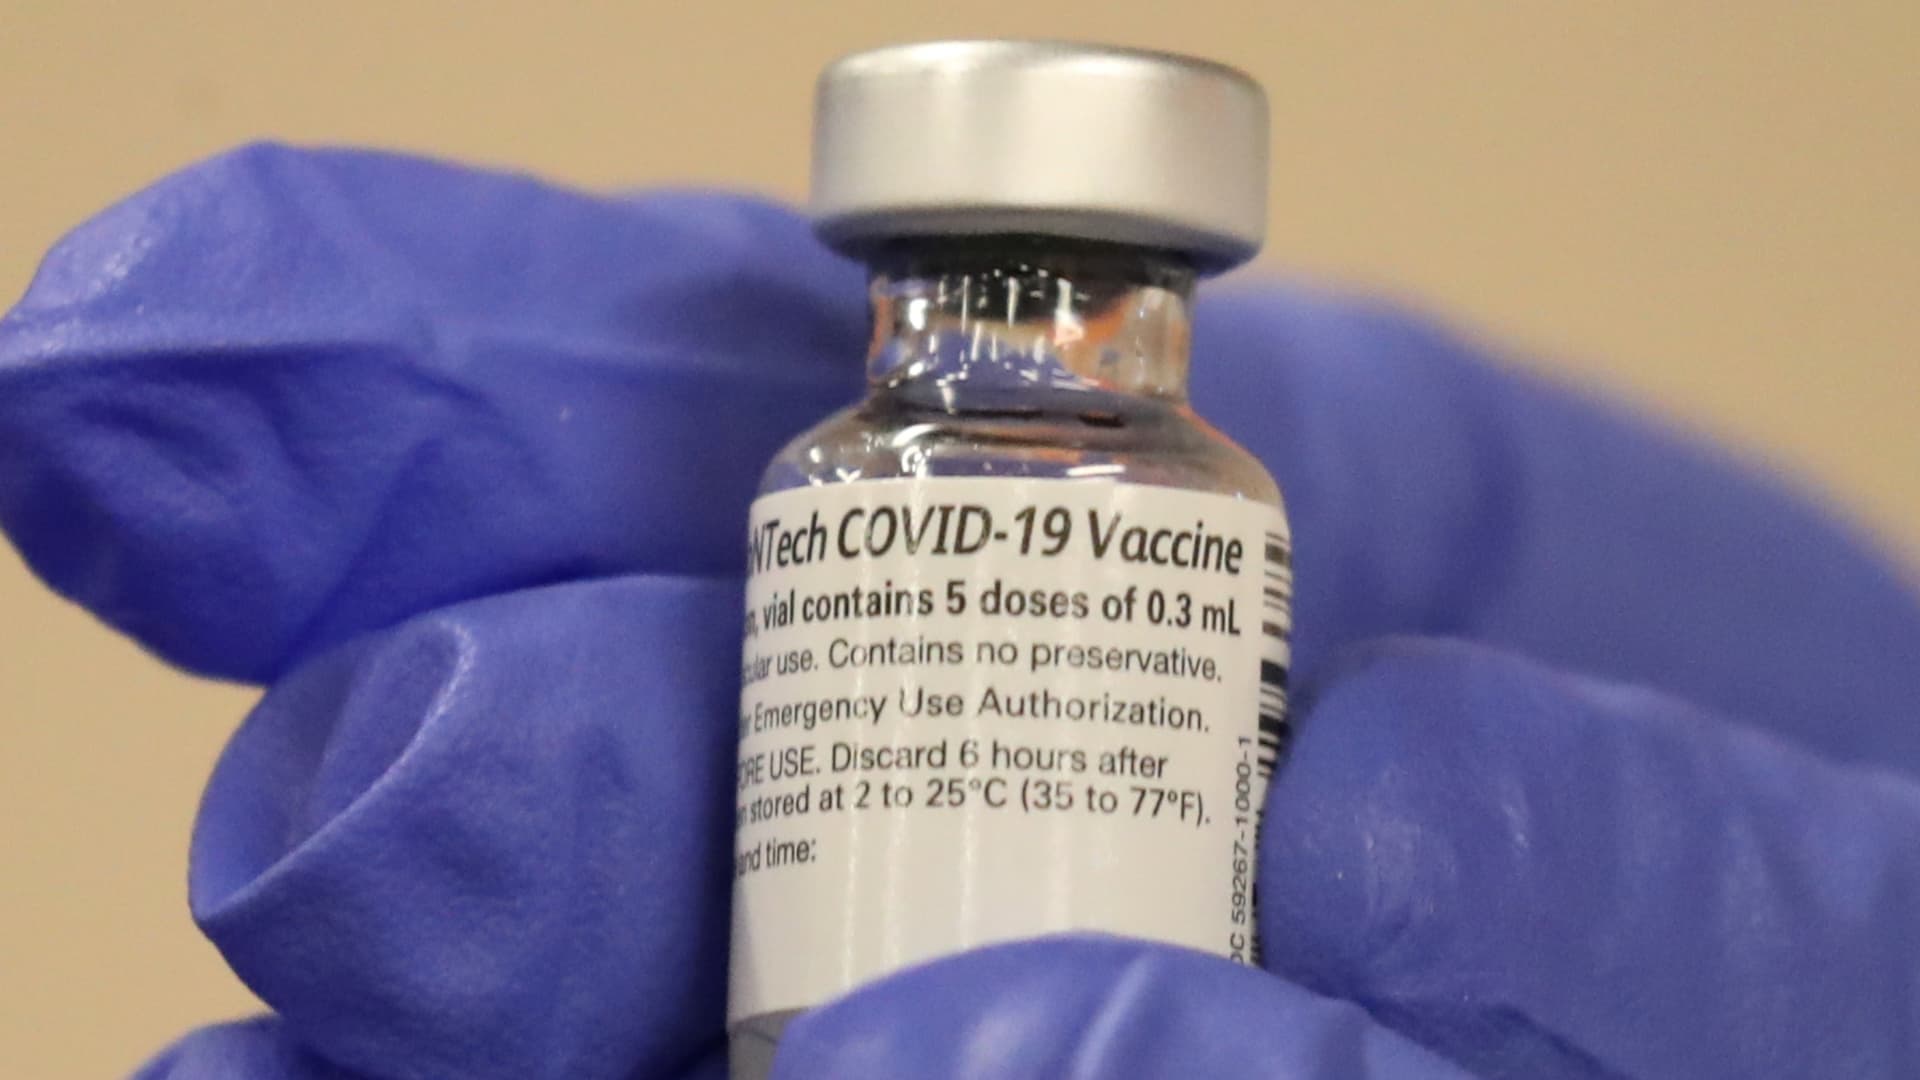 A healthcare worker holds a coronavirus disease (COVID-19) vaccine vial at Dignity Health Glendale Memorial Hospital and Health Center in Glendale, California, U.S., December 17, 2020.